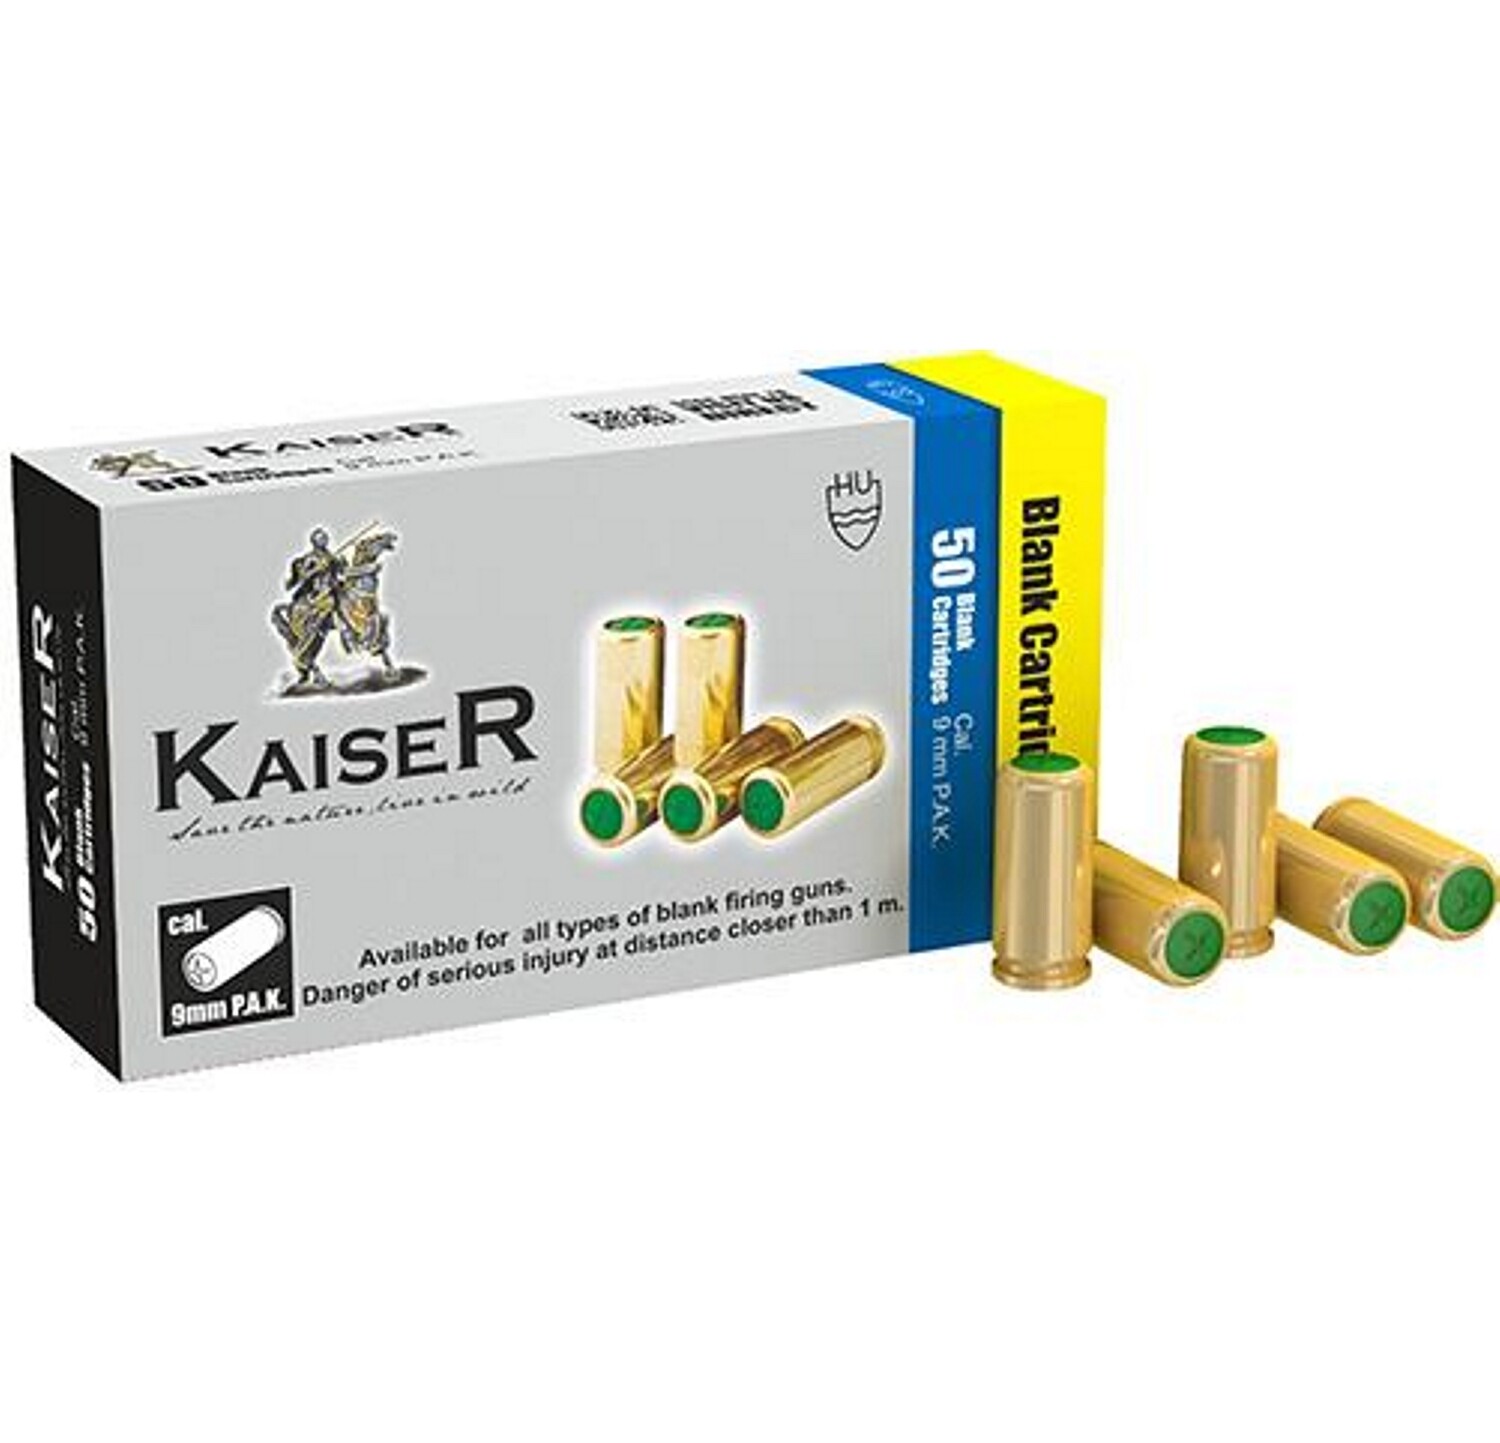 Kaiser 9mm P.A.K. Blank Rounds (box 50)- Online Only